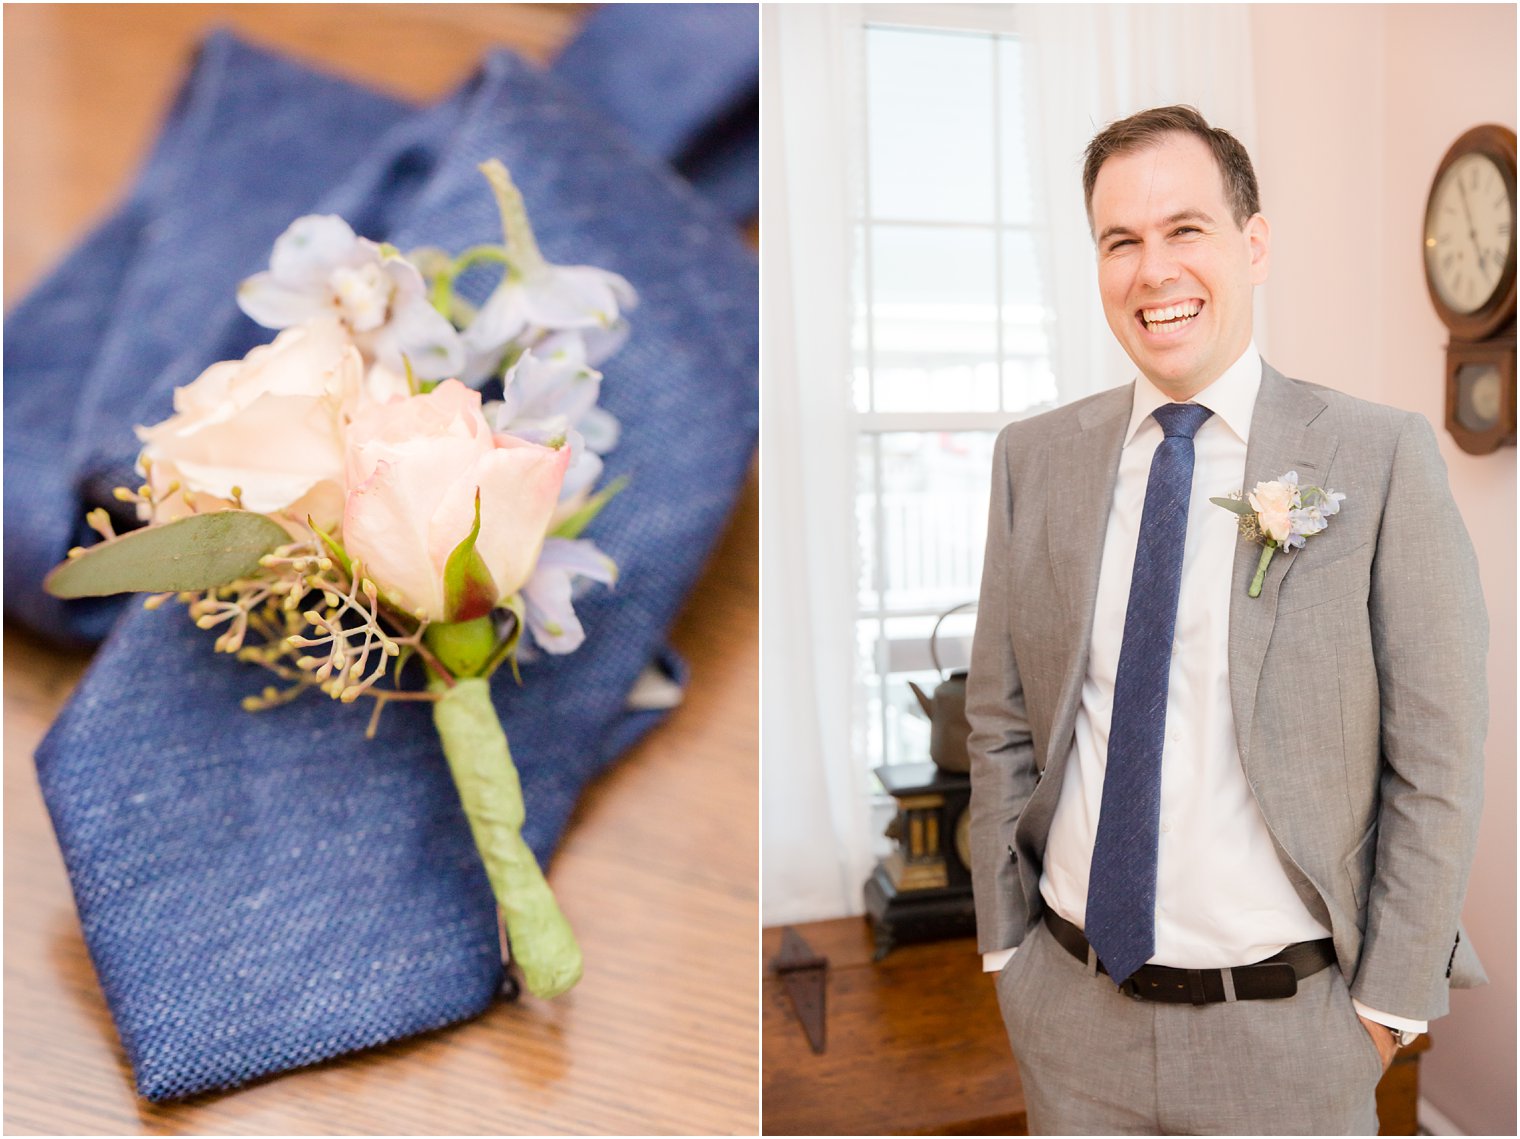 navy and grey wedding details for groom on Brant Beach Yacht Club wedding day photographed by Idalia Photography